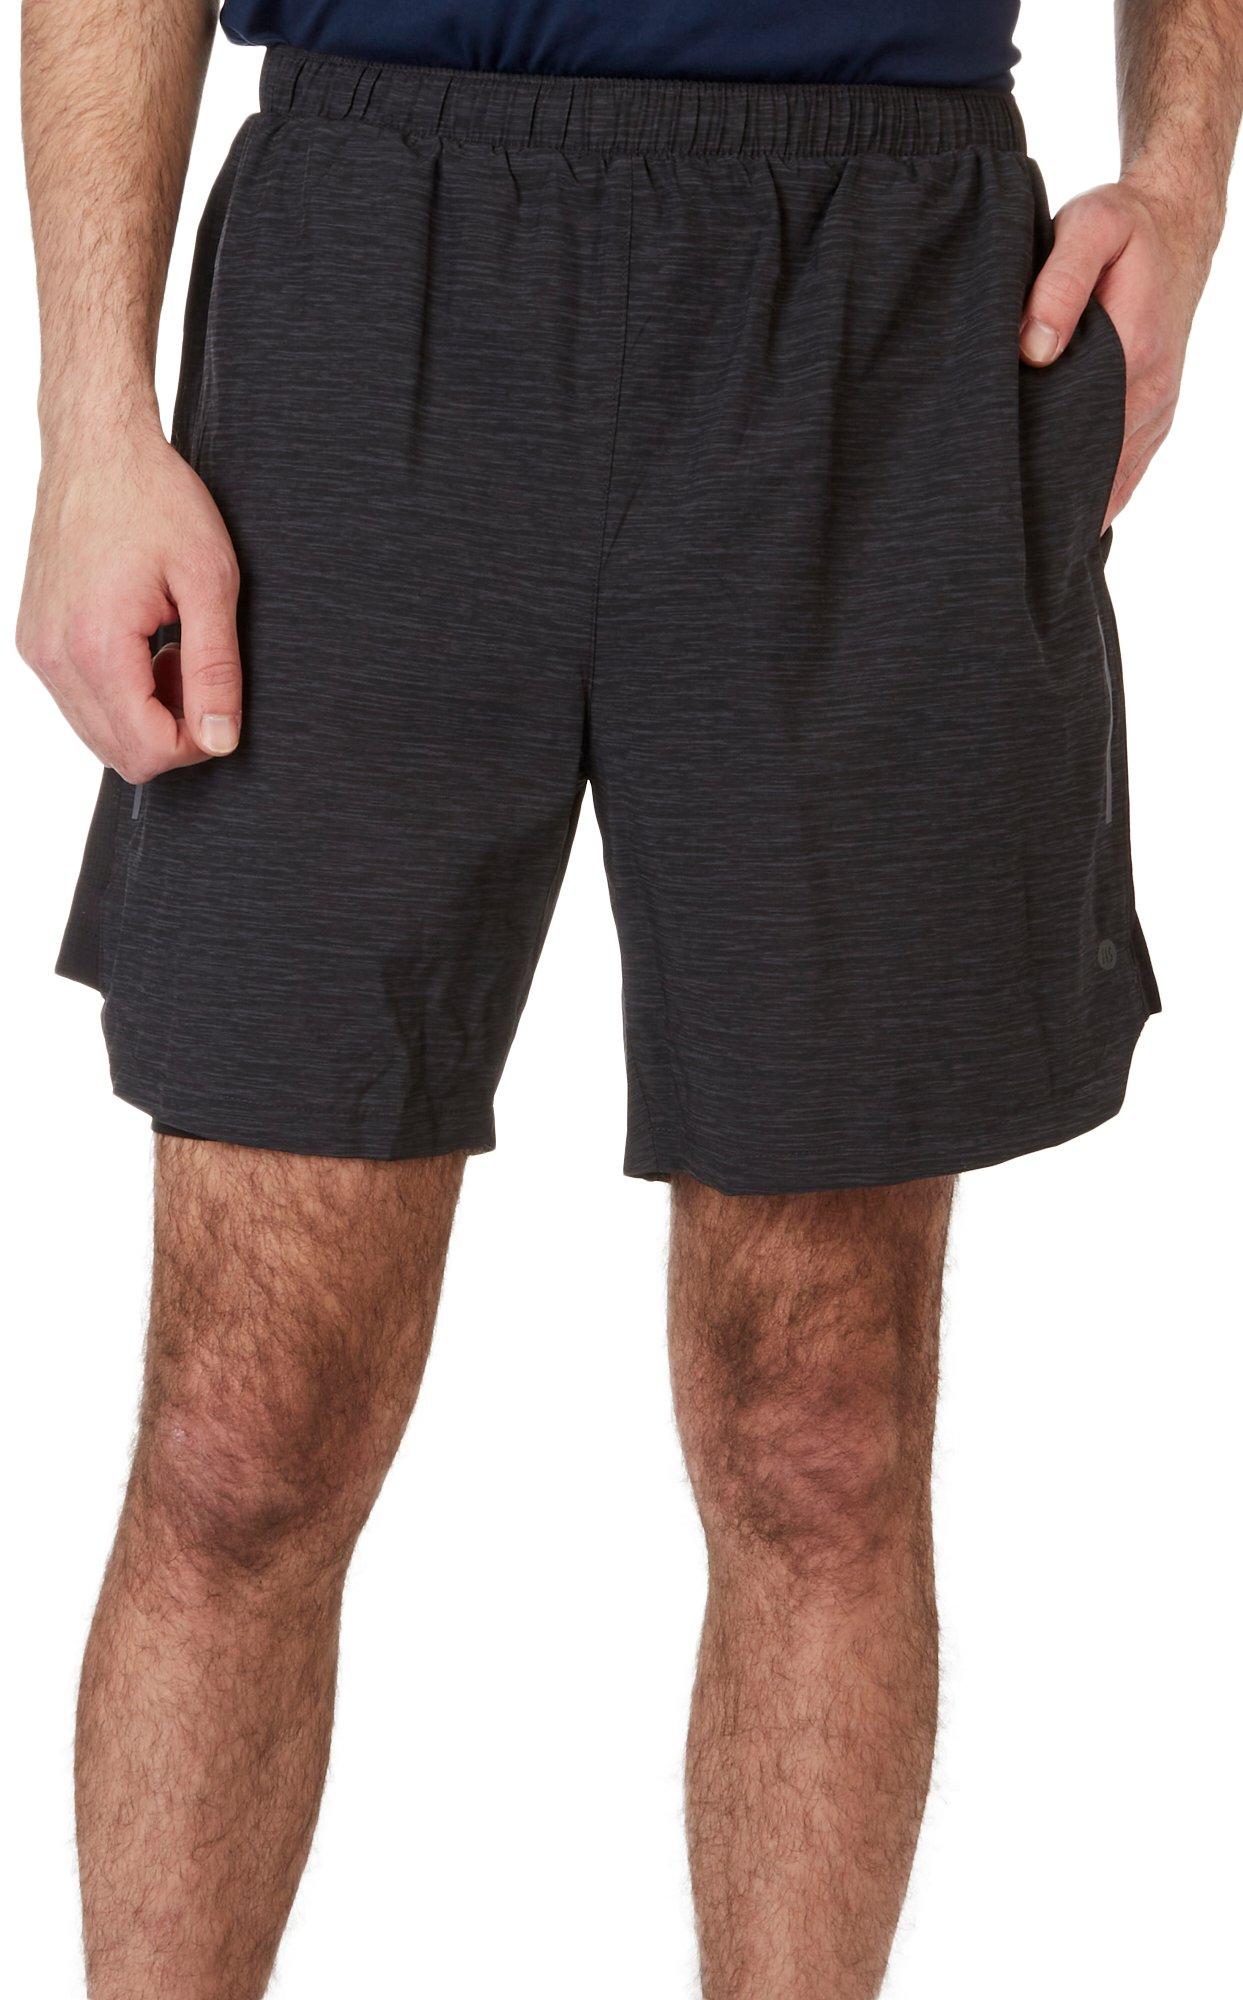 Mens 7 in. Solid 2-in-1 Brief Running Shorts